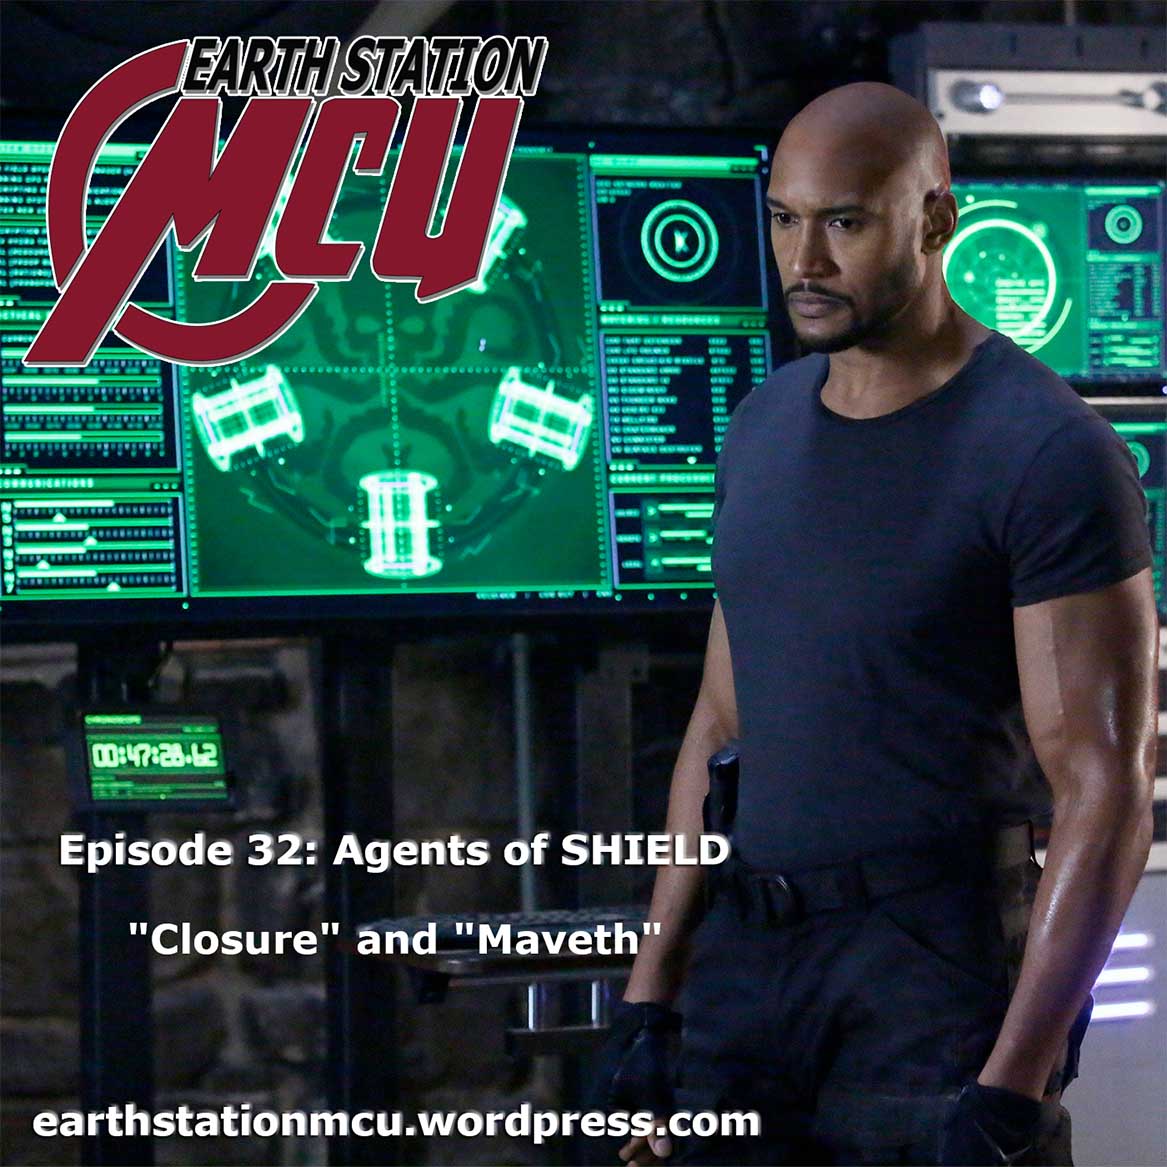 Earth Station MCU Episode 32: Agents of SHIELD ”Closure” and ”Maveth”